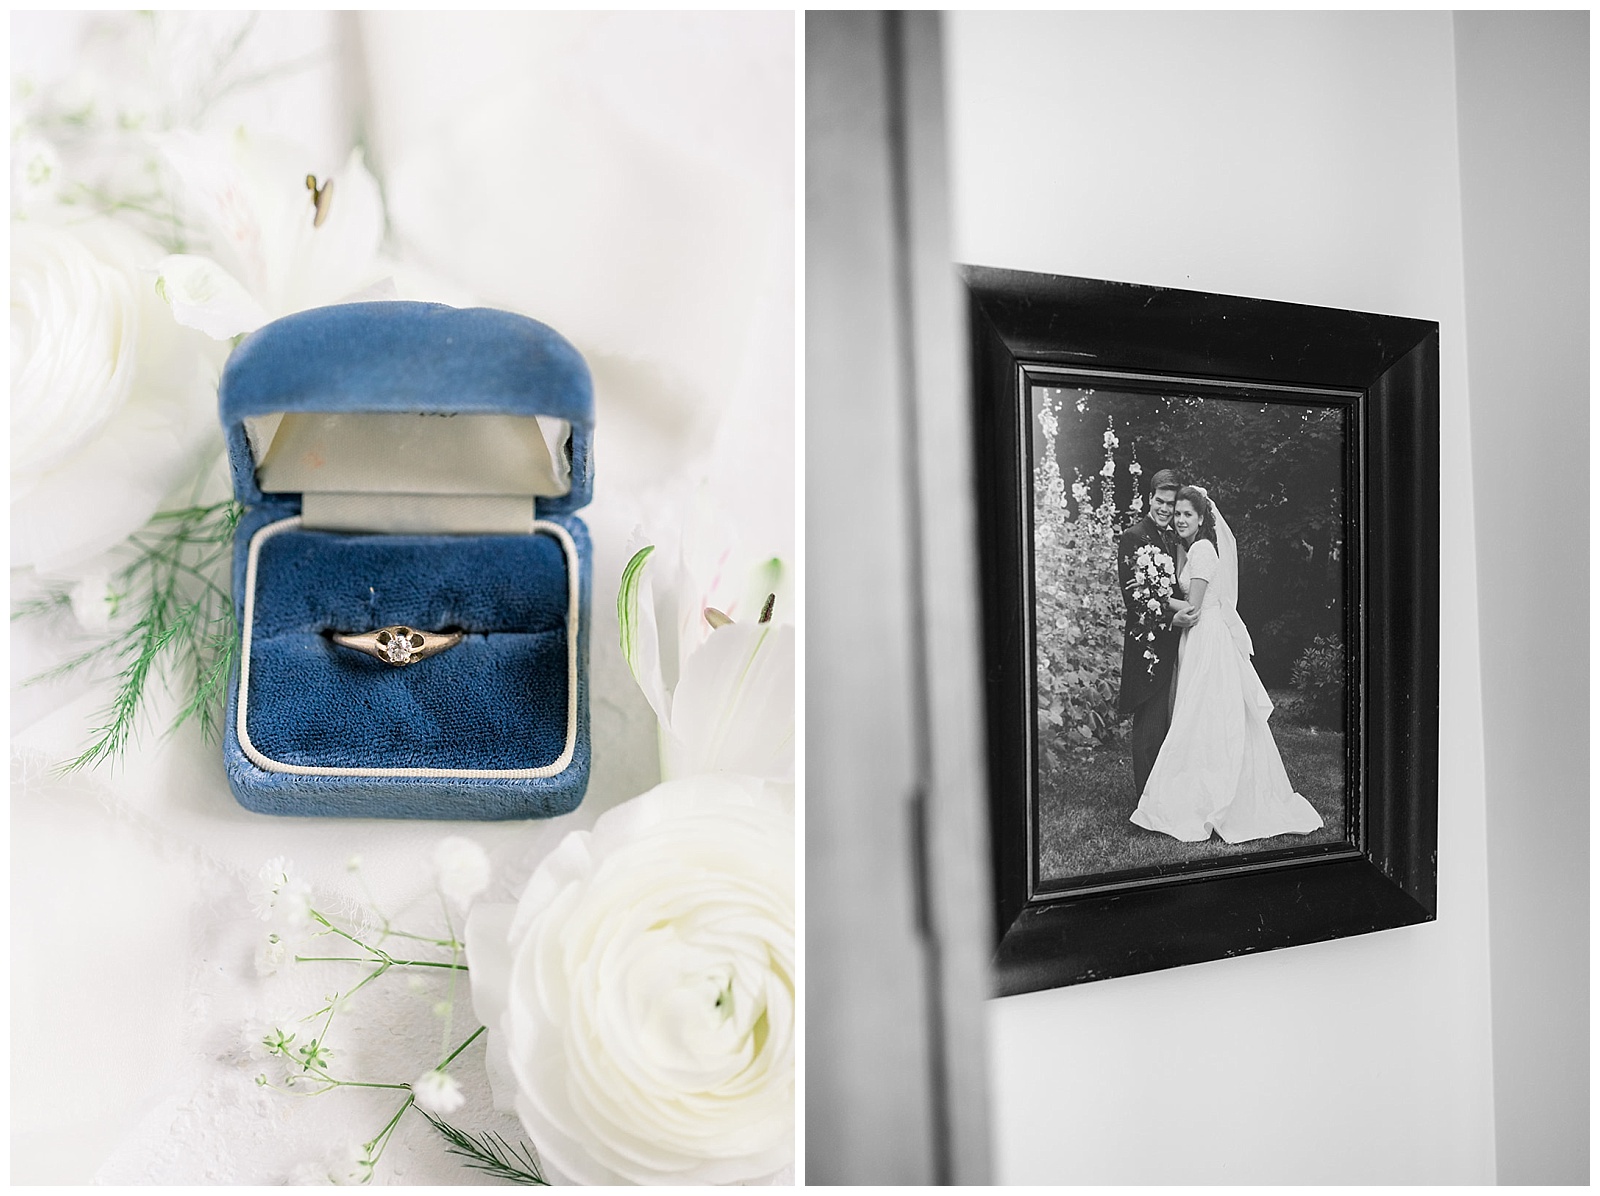 portrait of the parents of the bride and heirloom ring are on display in the bride's home as she gets ready for her wedding, an intimate home ceremony as a gift from her family